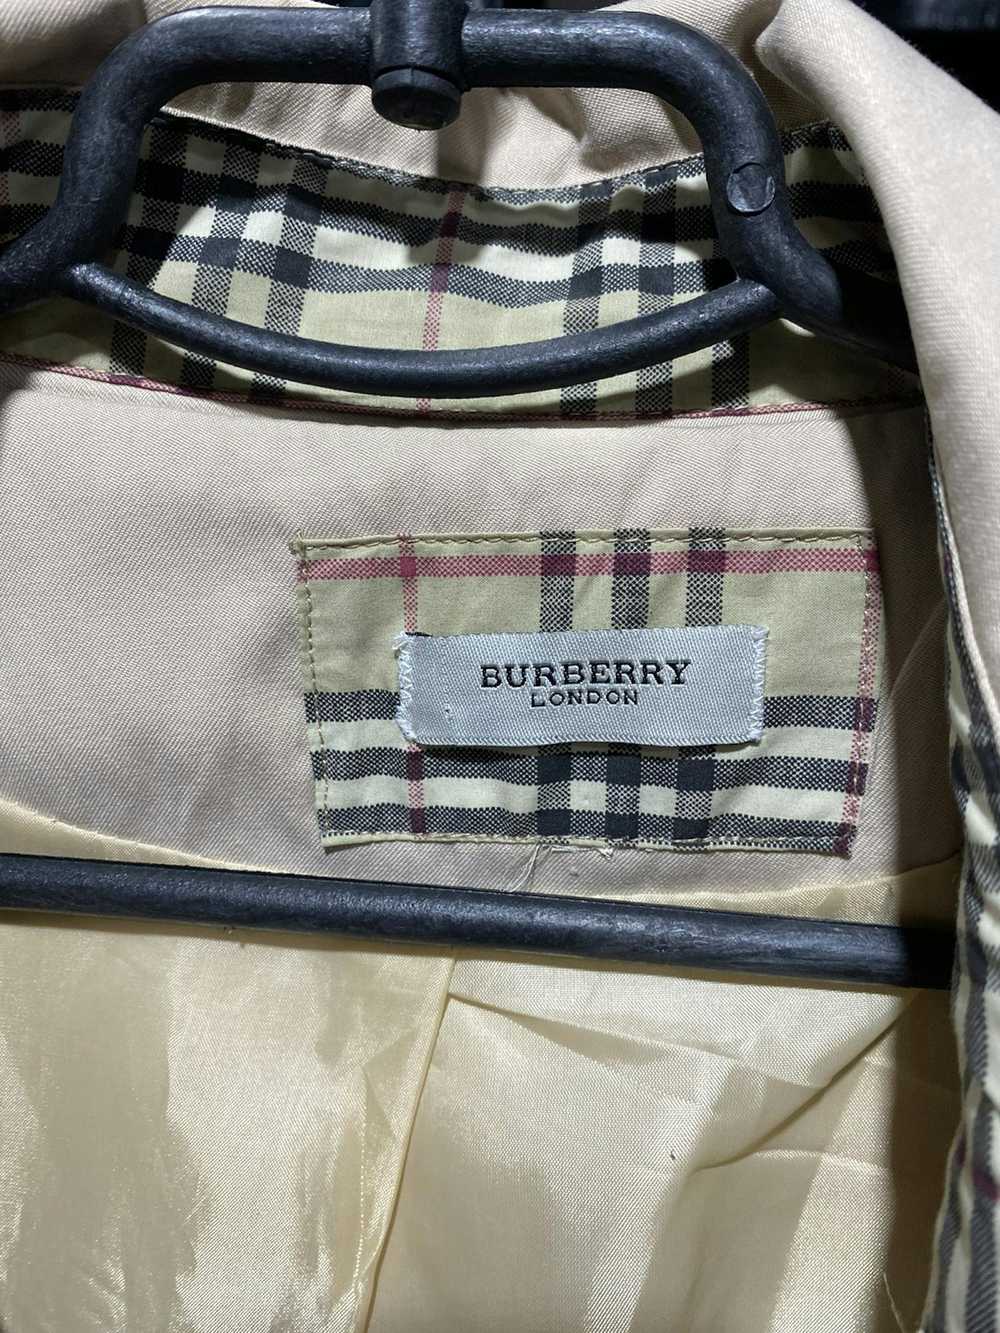 Burberry × Luxury × Vintage Burberry 's trench co… - image 6